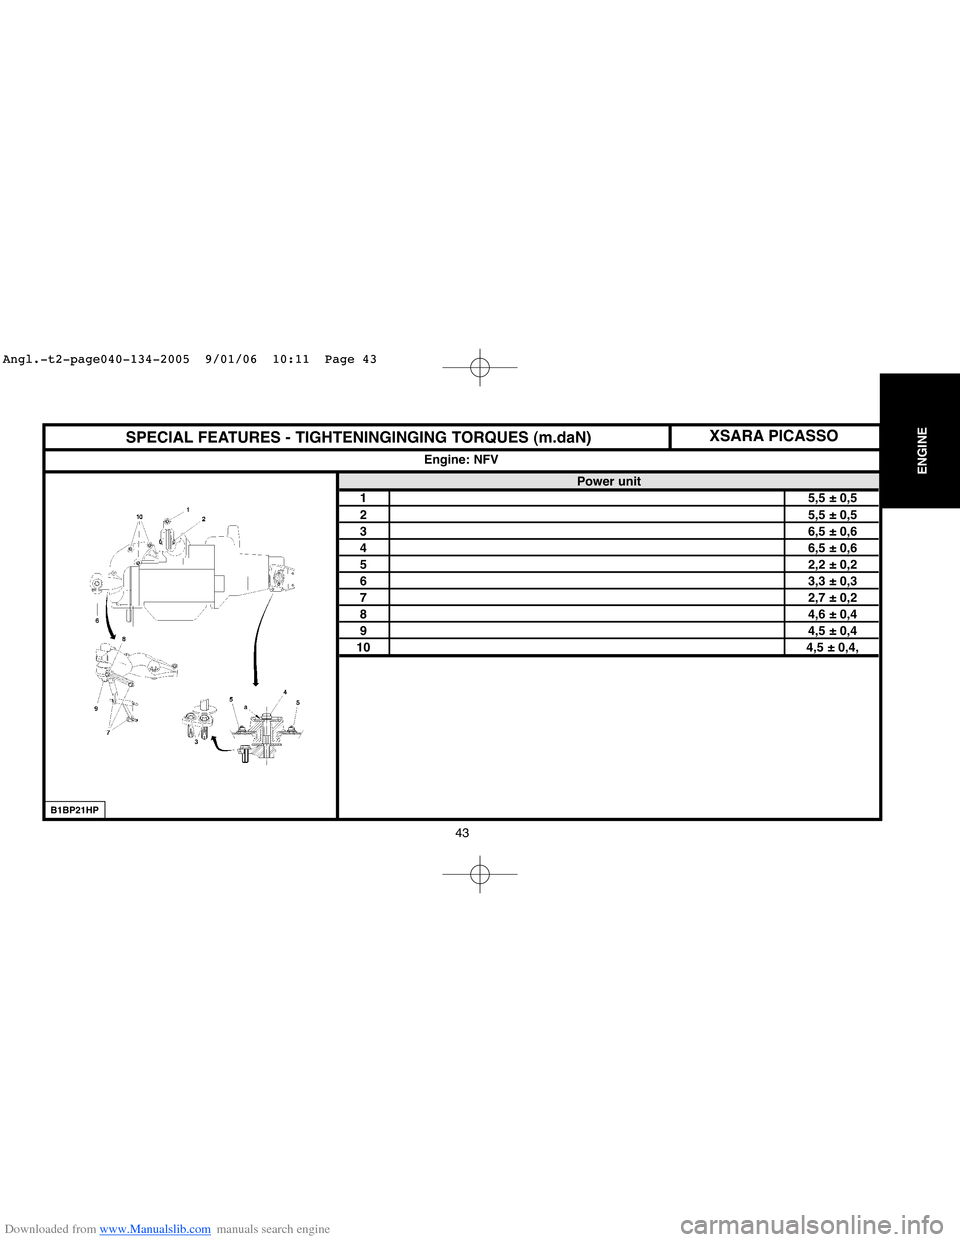 Citroen BERLINGO 2005 1.G Service Manual Downloaded from www.Manualslib.com manuals search engine 43
ENGINE
SPECIAL FEATURES - TIGHTENINGINGING TORQUES (m.daN)
Power unit
15,5 ± 0,5
25,5 ± 0,5
36,5 ± 0,6
46,5 ± 0,6
52,2 ± 0,2
63,3 ± 0,